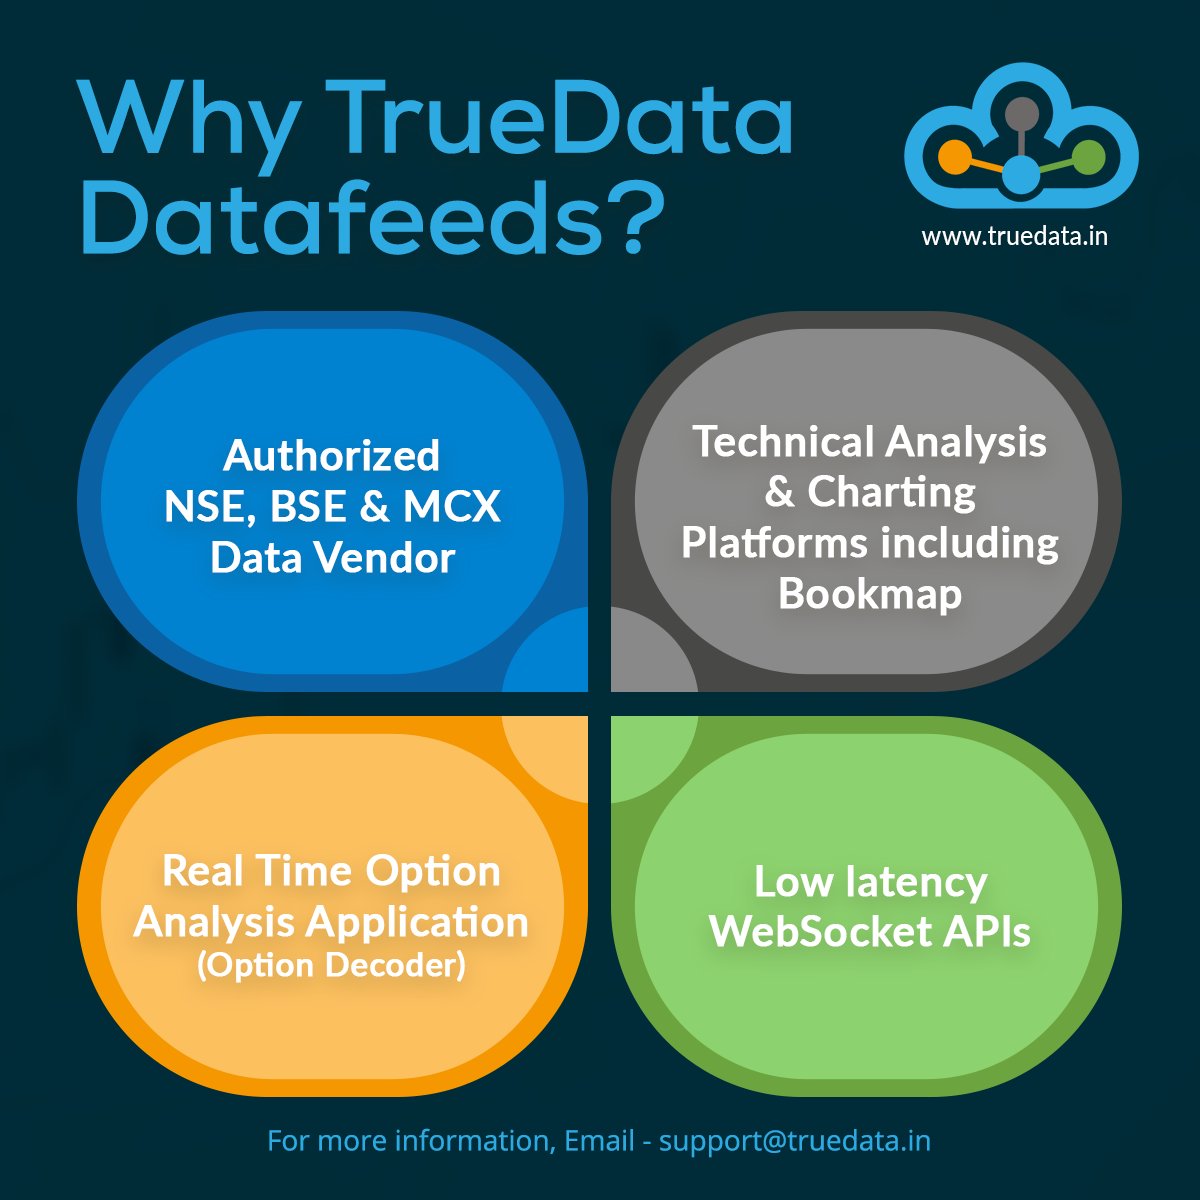 🔥📣 Why TrueData Datafeeds?
💁‍♂️ Authorized NSE, BSE & MCX Data Vendor
💁‍♂️ Technical Analysis & Charting Platforms including Bookmap
💁‍♂️ Real Time Option Analysis Application (Option Decoder)
💁‍♂️ Low latency WebSocket APIs
#TrueData #optiondecoder #velocity #AnalysisSoftware #charts